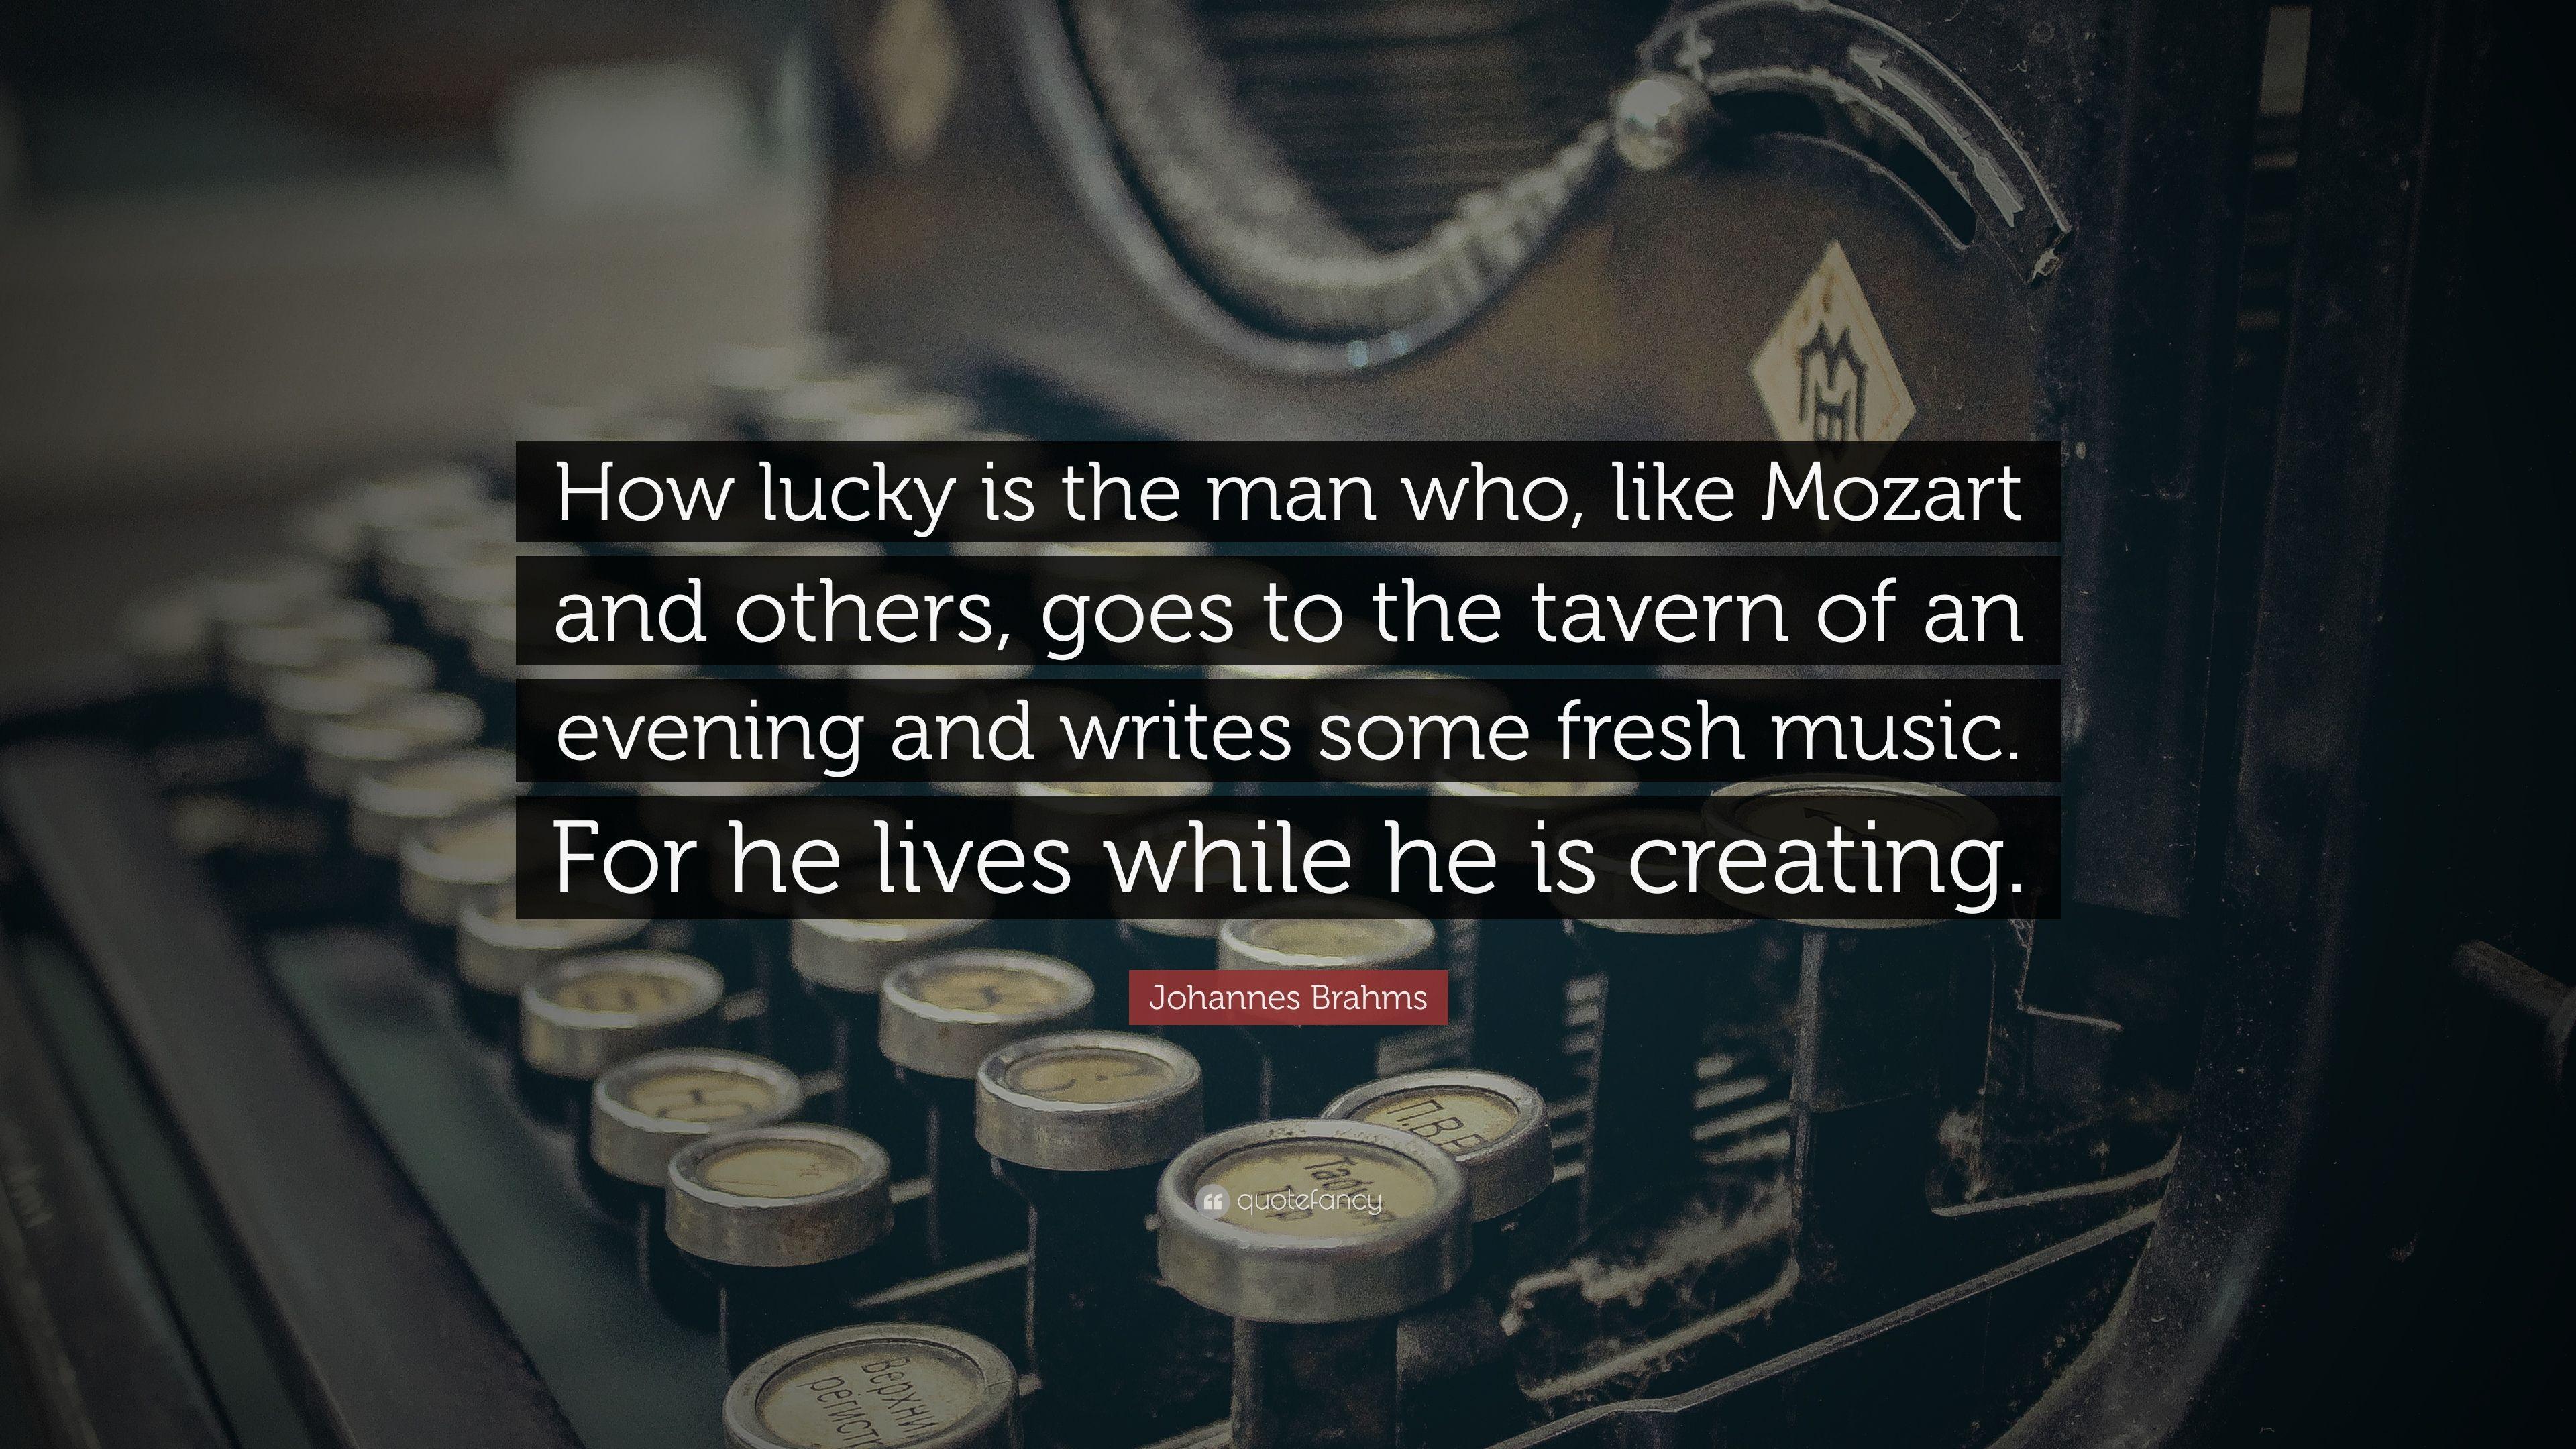 Johannes Brahms Quote: “How lucky is the man who, like Mozart